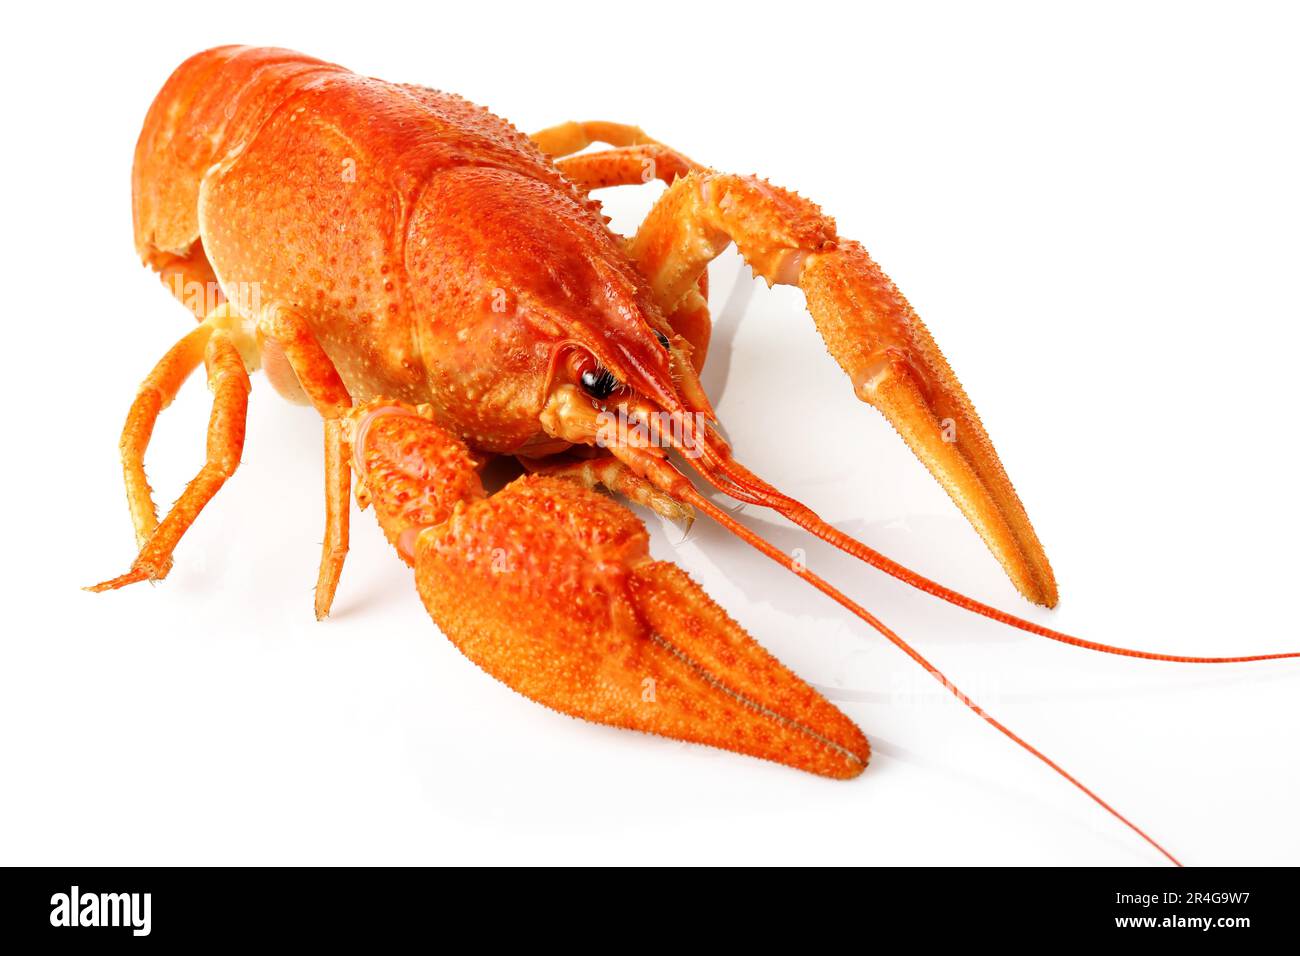 Large red lobster isolated on white background Stock Photo